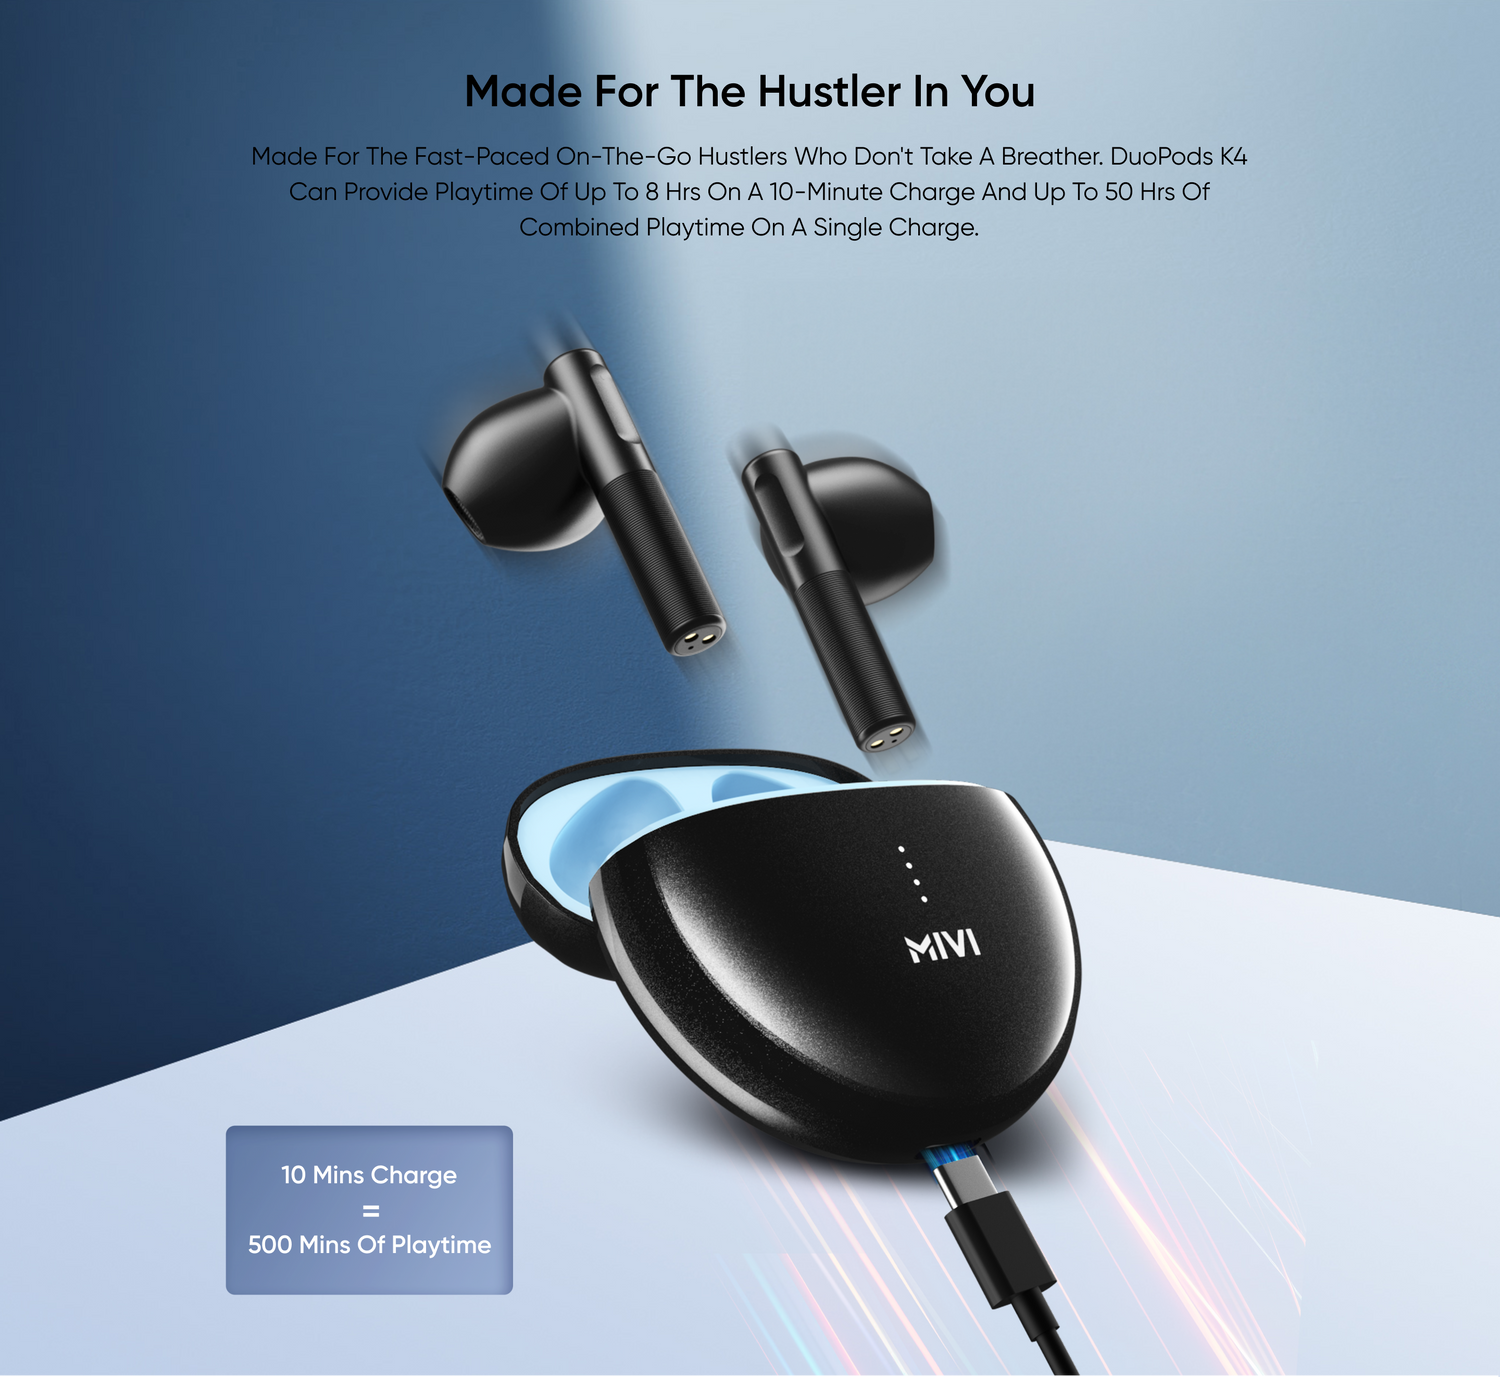 Made For the Hustler in You
Made for the fast-paced on-the-go hustlers who don't take a breather. DuoPods K4 can provide playtime of up to 8 Hrs on a 10-minute charge and up to 50 hrs of combined playtime on a single charge.